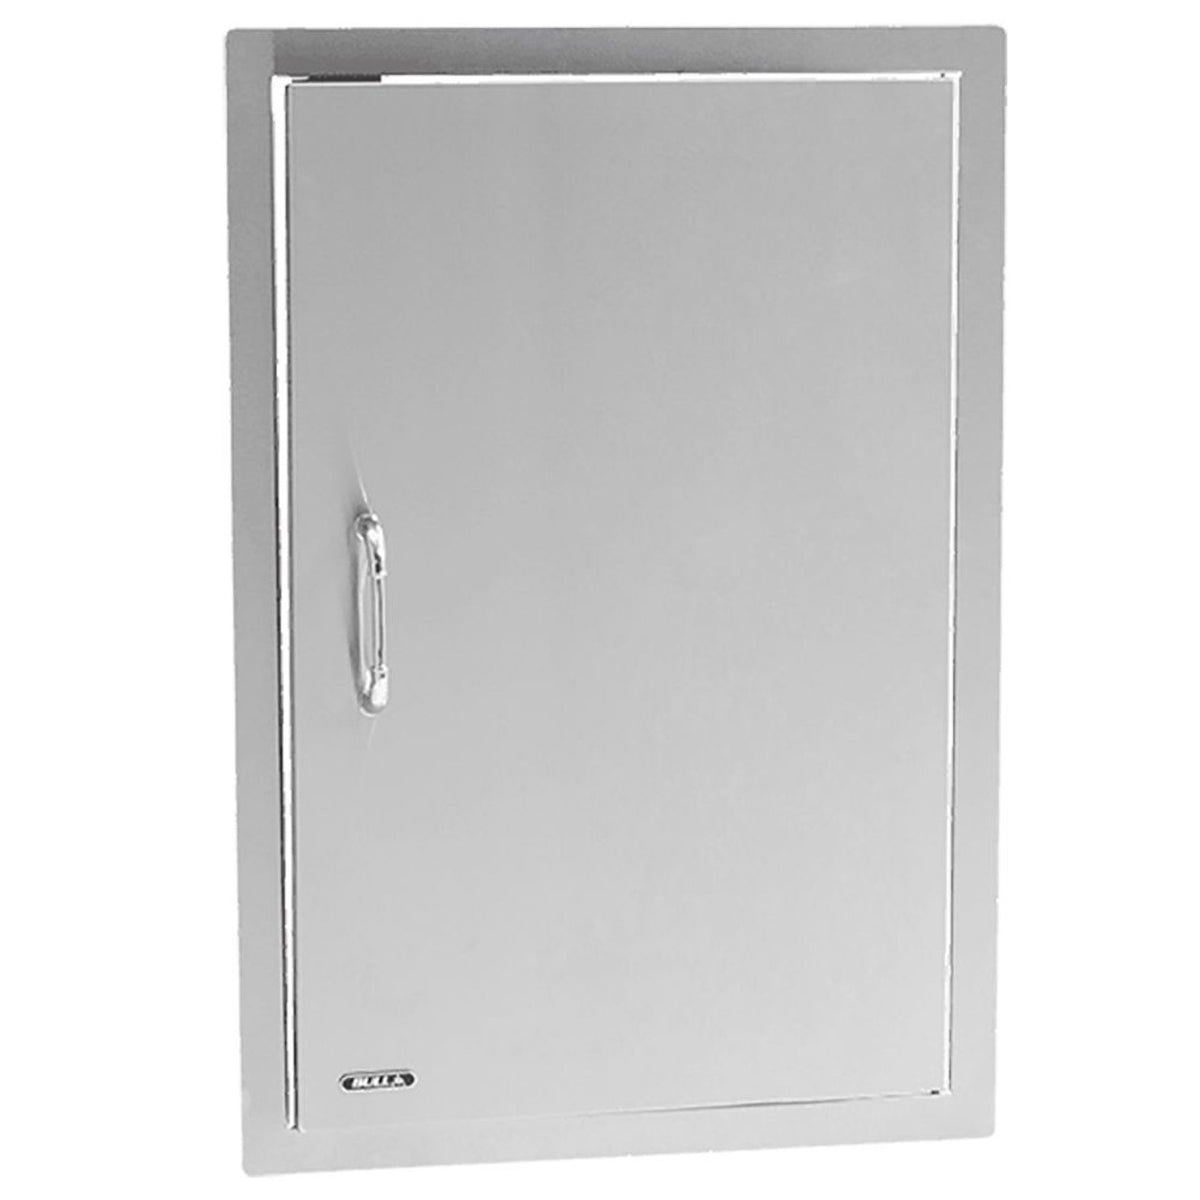 Bull Extra Large Stainless Steel Vertical Access Door